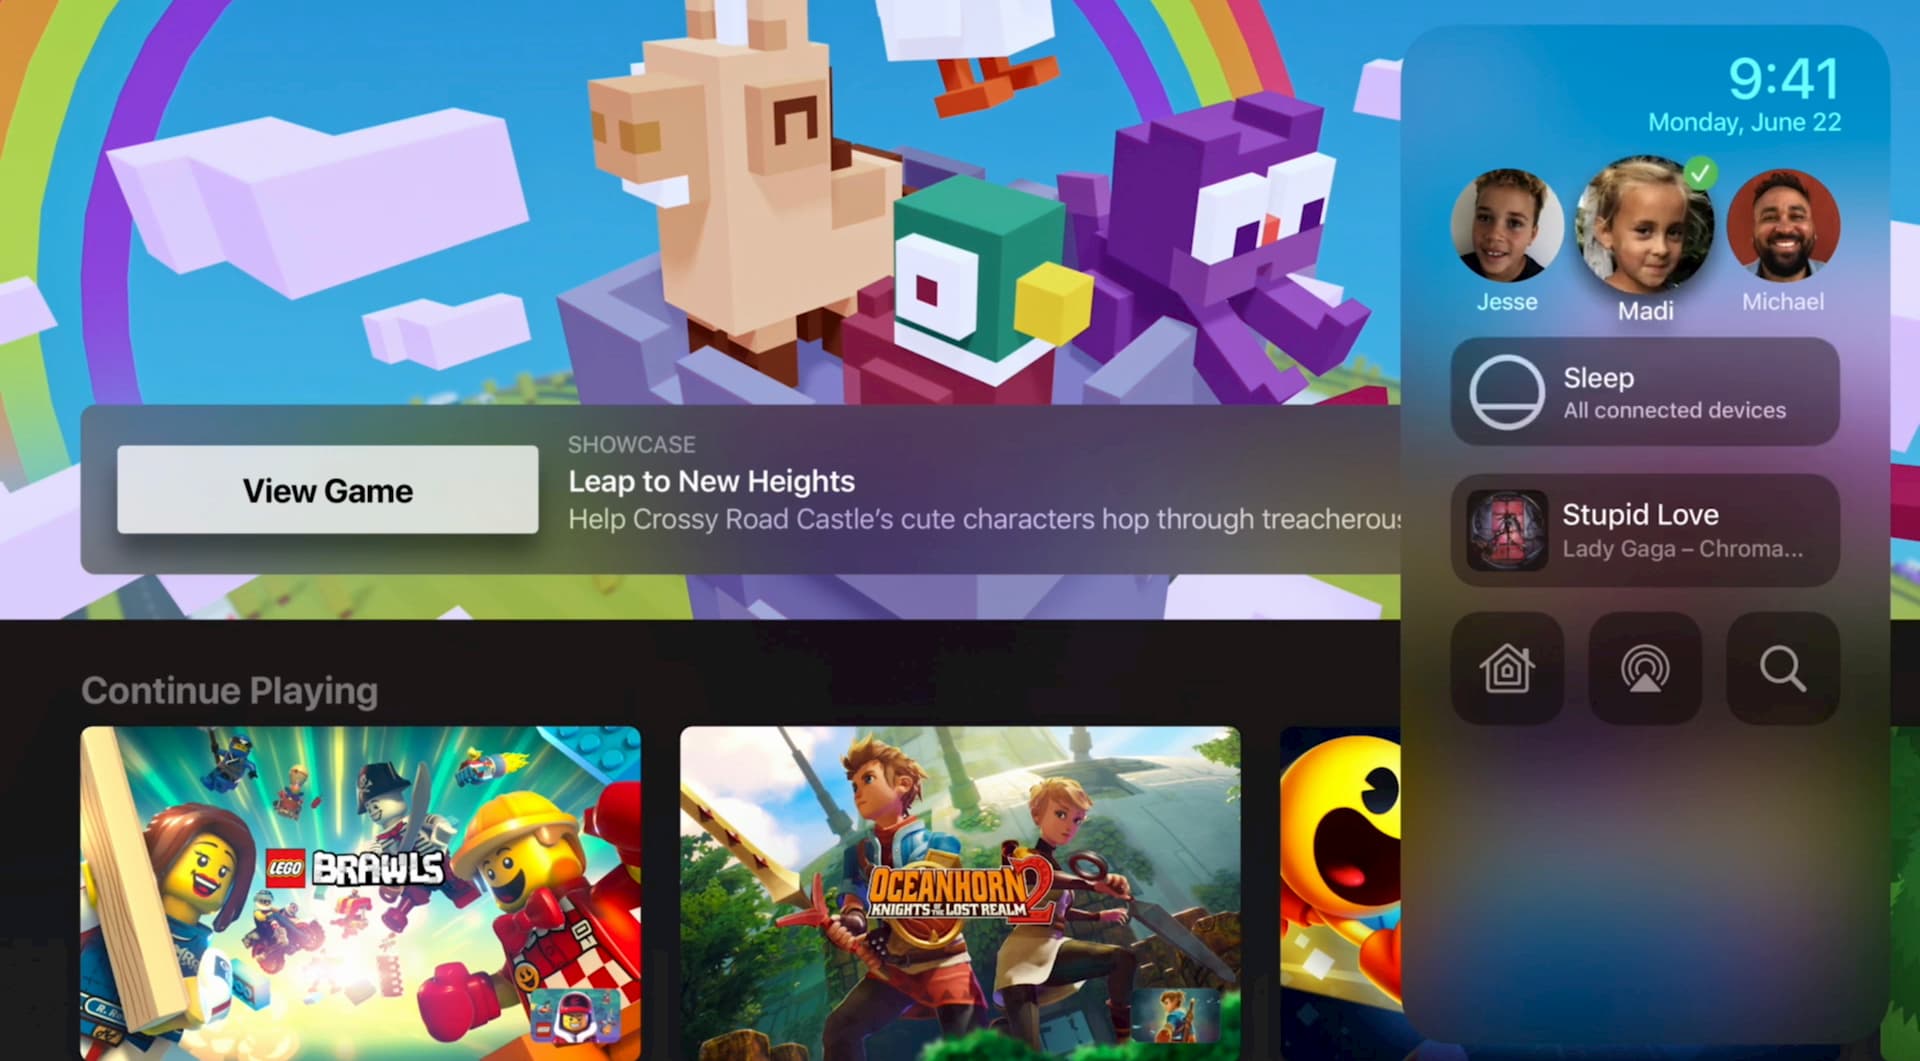 Apple TV features tvOS 14 - enchanted multiuser support for Apple Arcade gaming